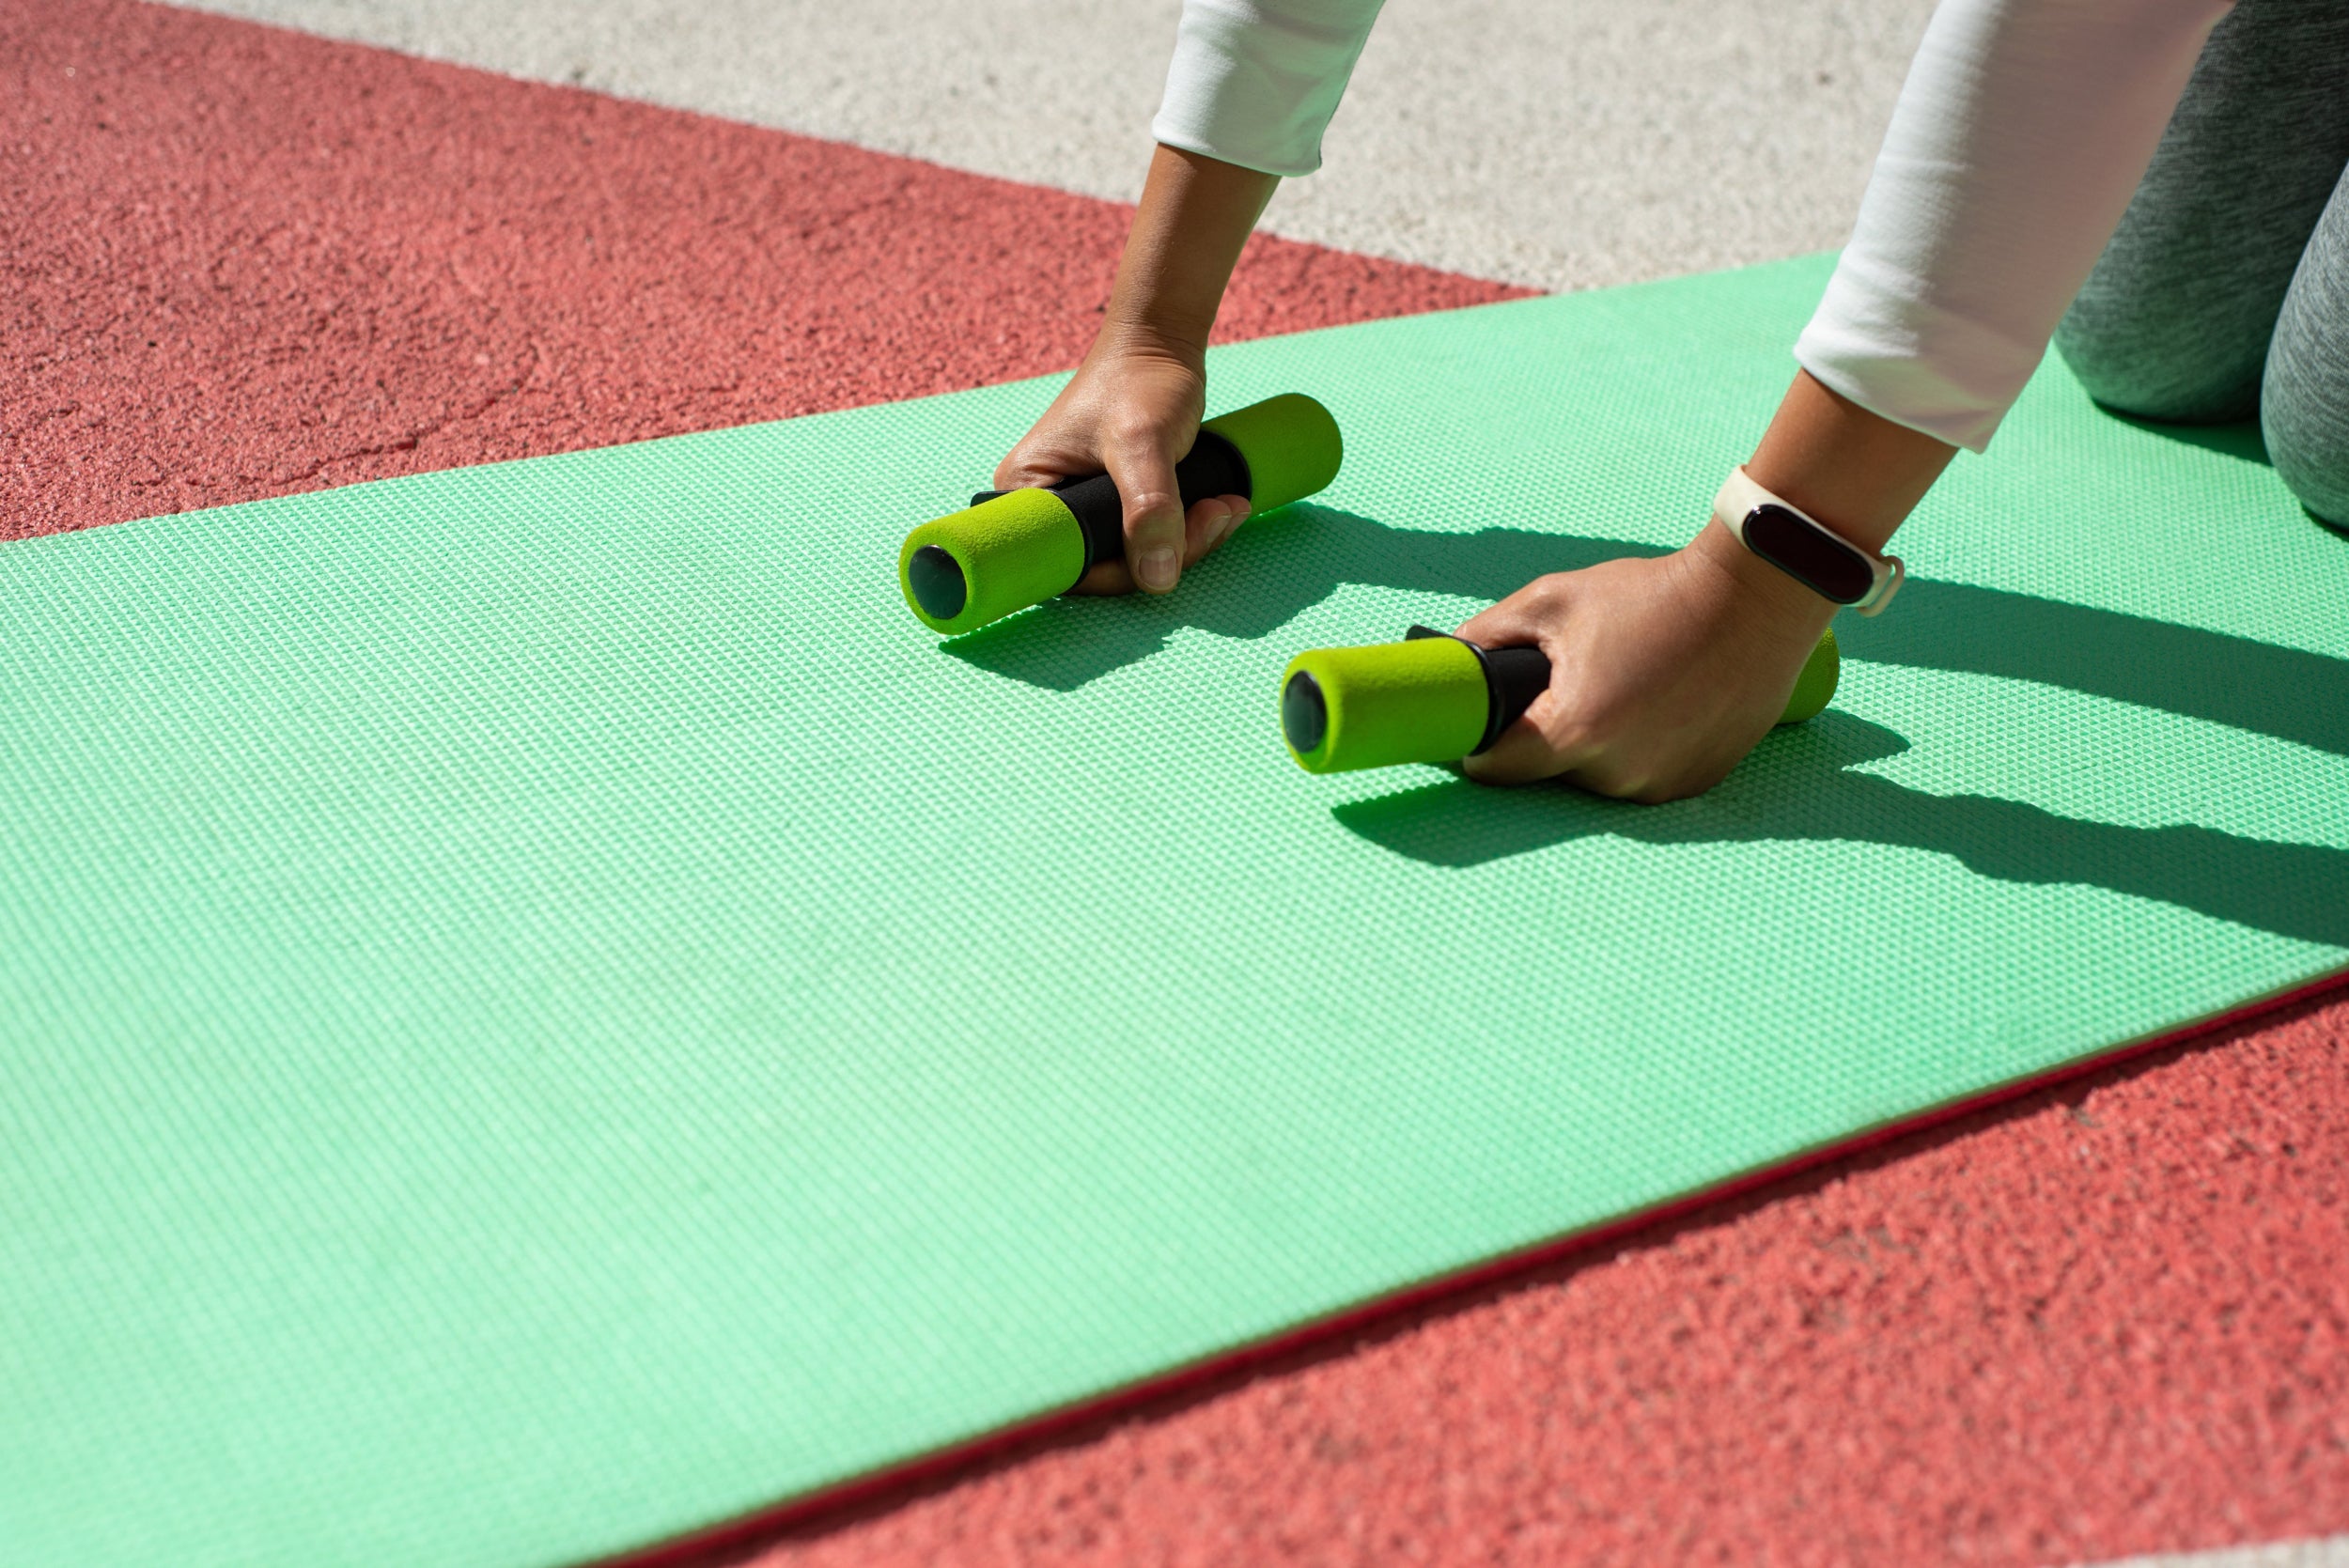 Two hands hold fitness weights on a green yoga mat